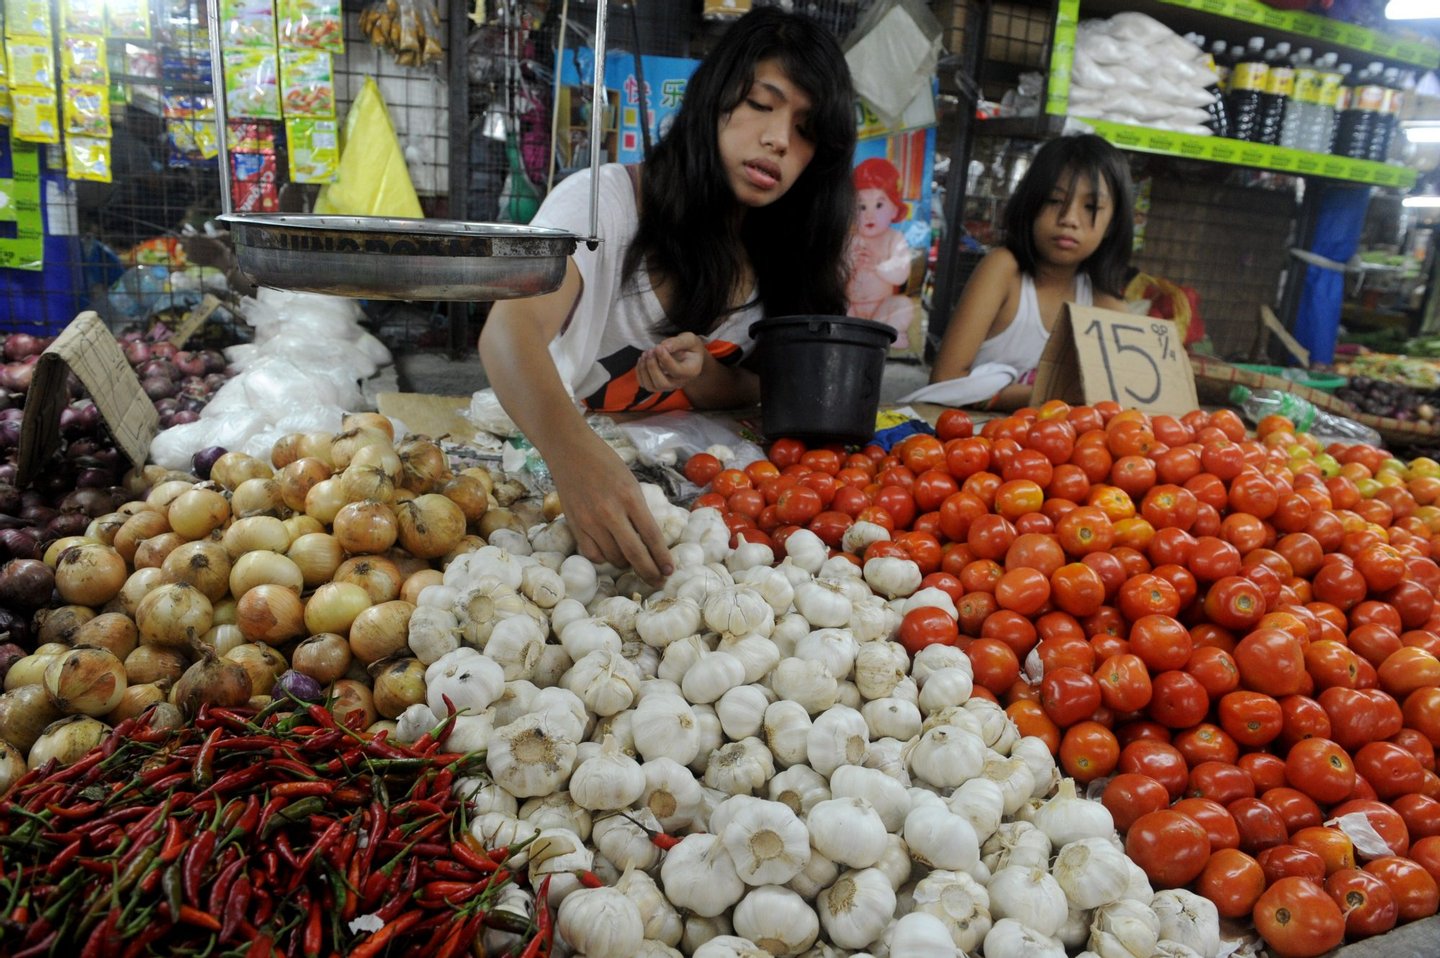 A vendo selling garlic at a market in Manila on August 5, 2014. Philippine inflation shot up to a nearly three-year high of 4.9 percent in July, the government said, when many Filipinos were priced out of food items such as garlic. AFP PHOTO / Jay DIRECTO (Photo credit should read JAY DIRECTO/AFP/Getty Images)